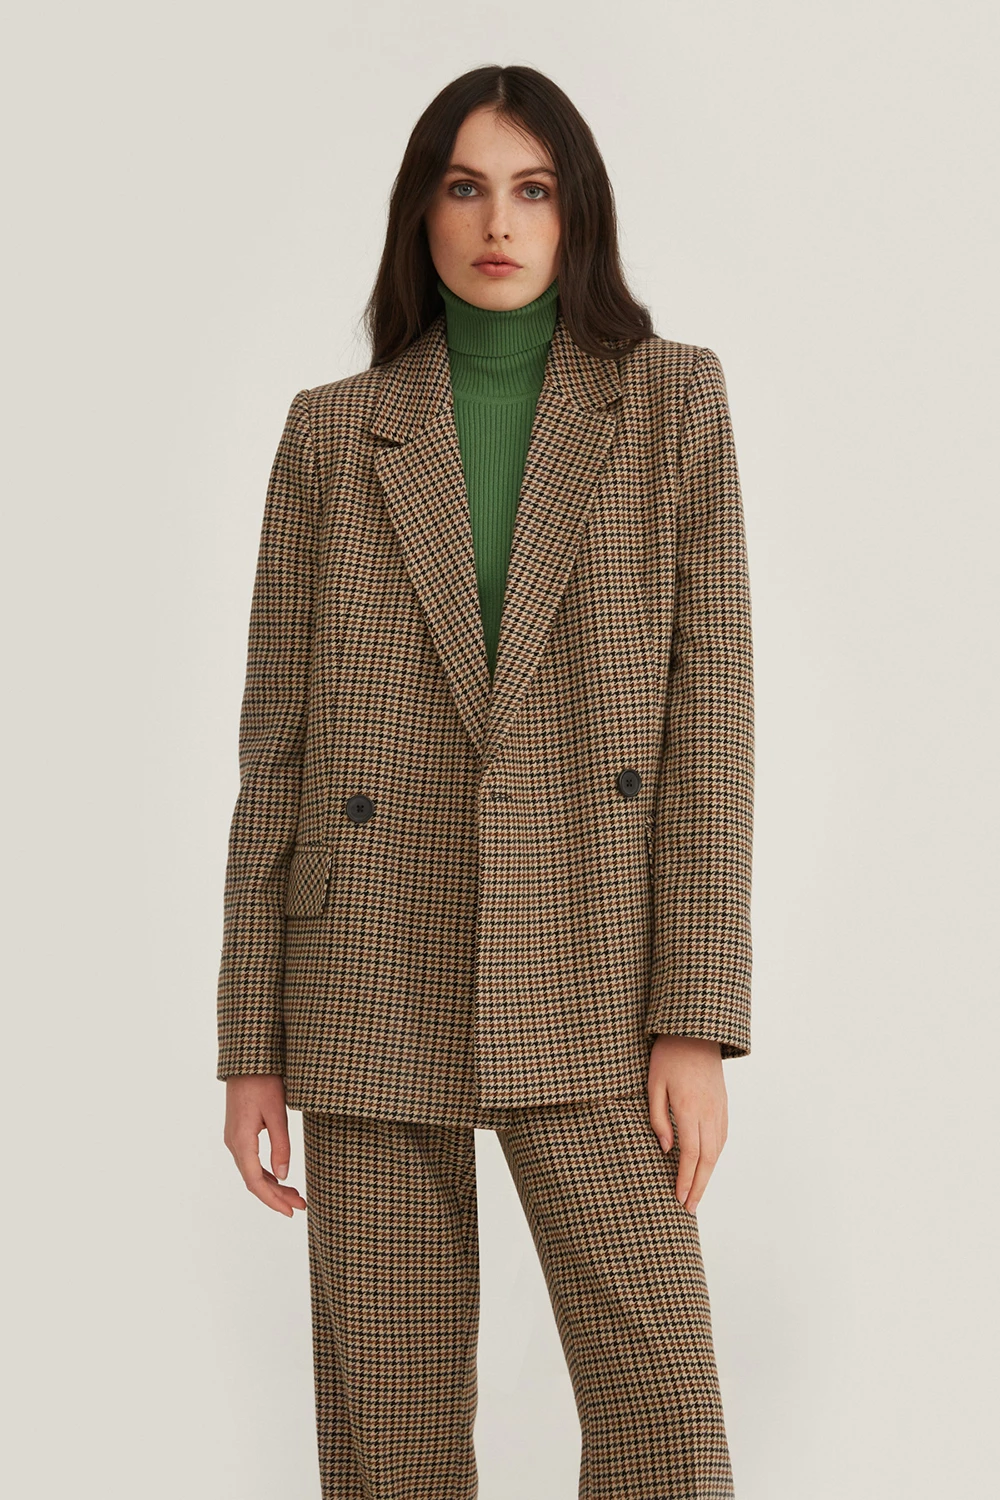 Double-breasted jacket in houndstooth pattern with wool, photo 6